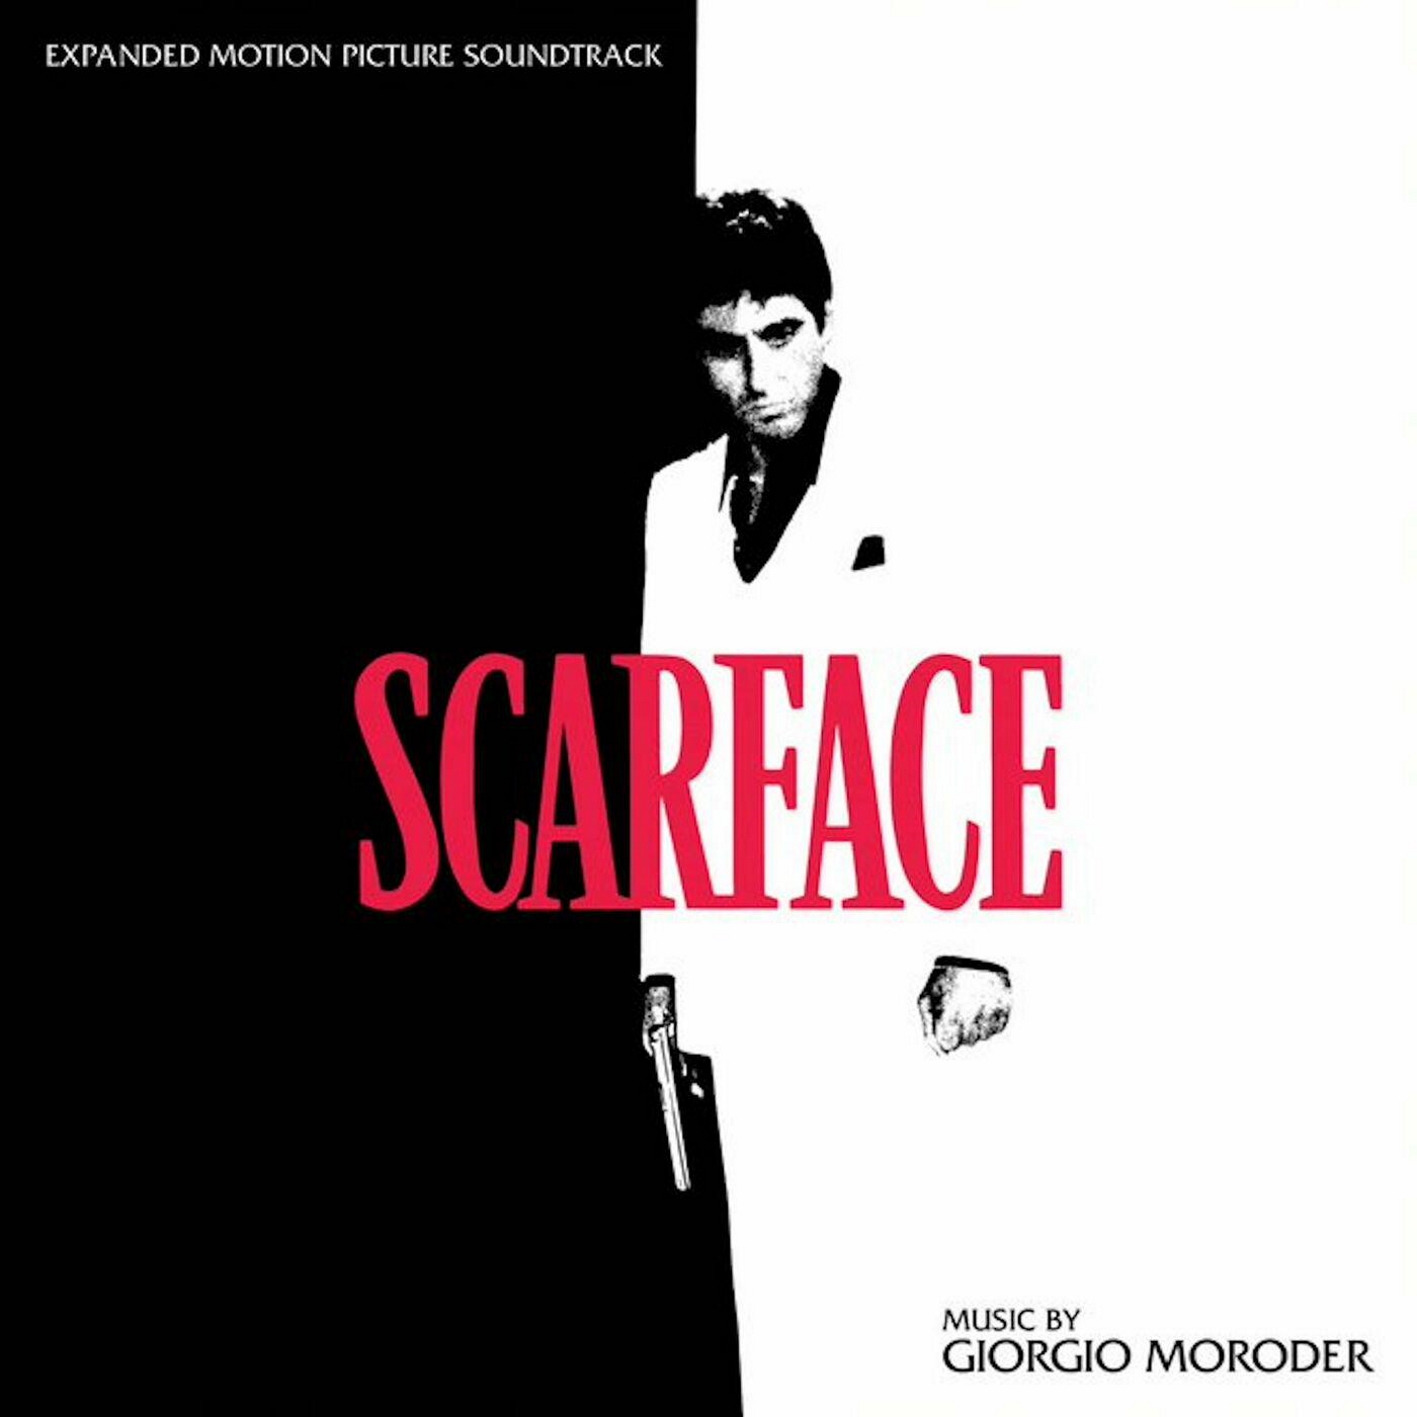 Giorgio Moroder - Scarface (Expanded Motion Picture Soundtrack)